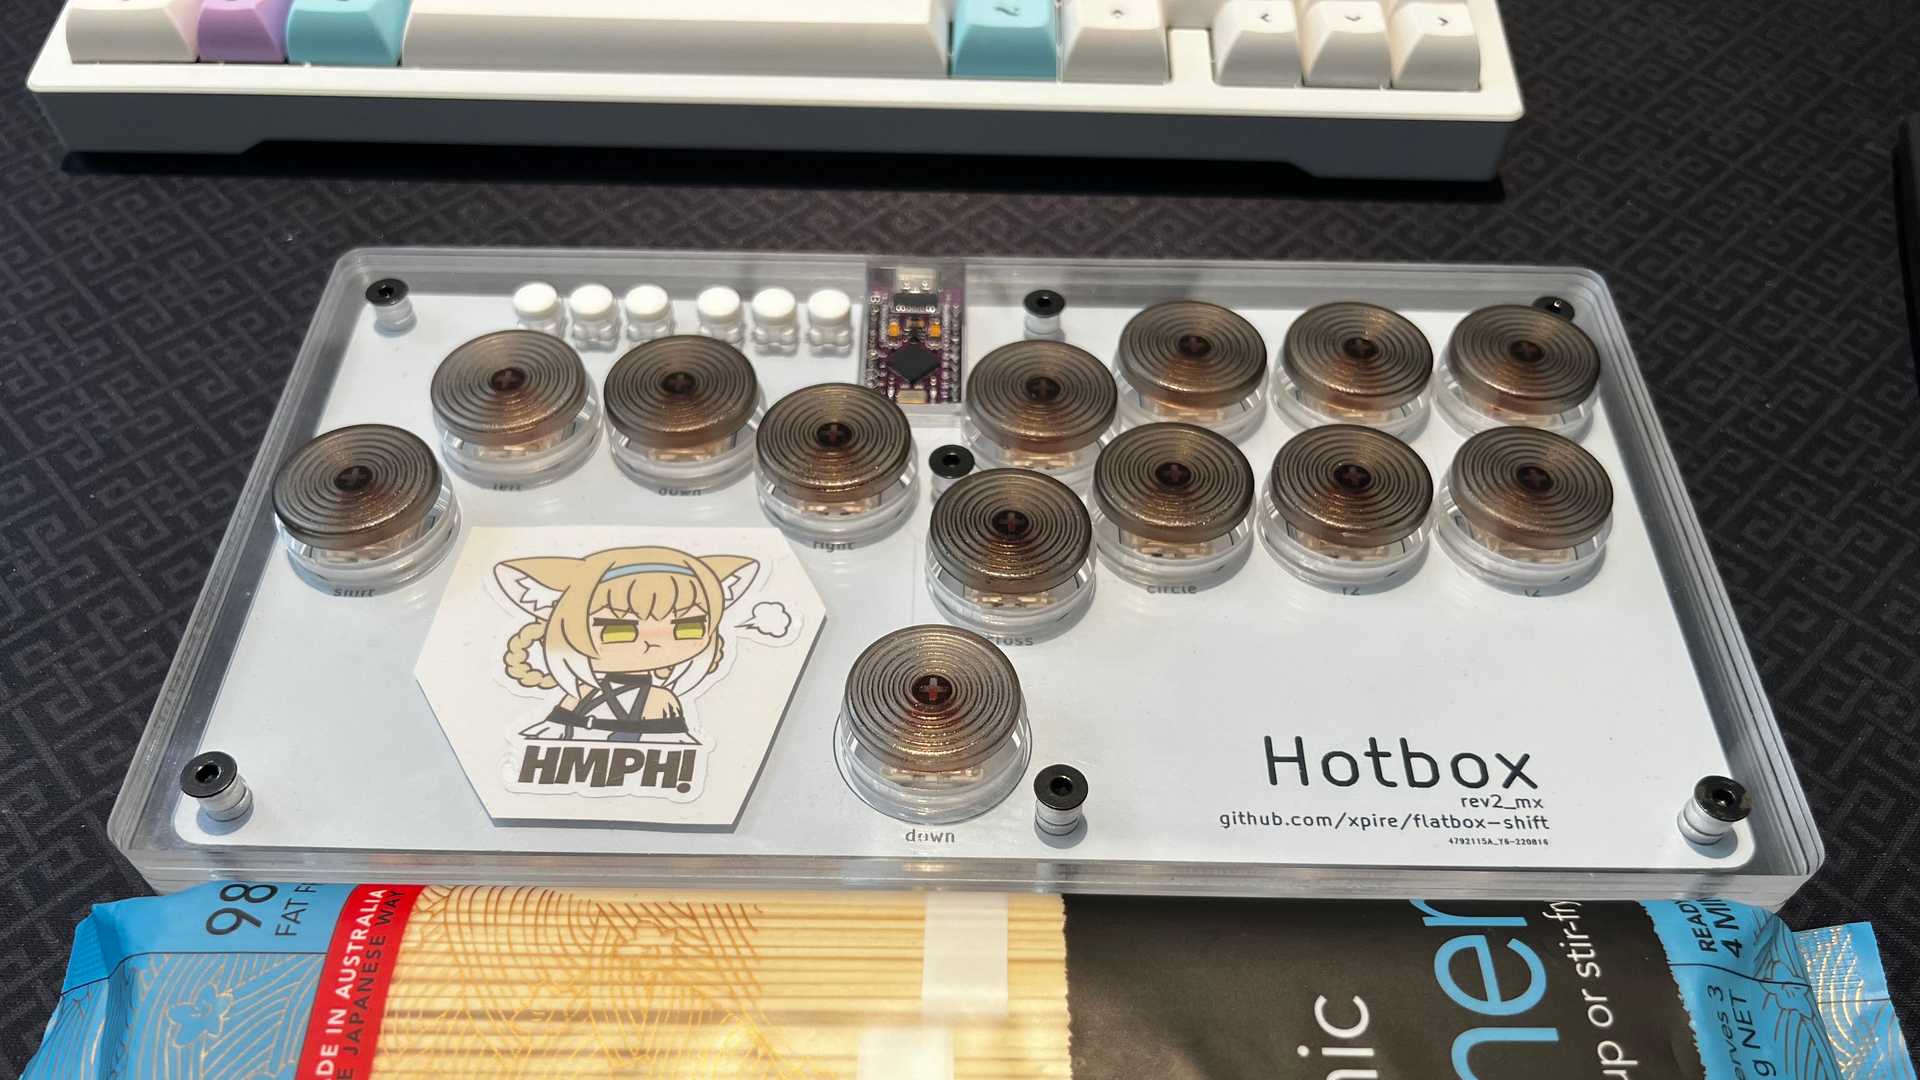 Hotbox - fabricating a low profile hitbox-layout fightstick image